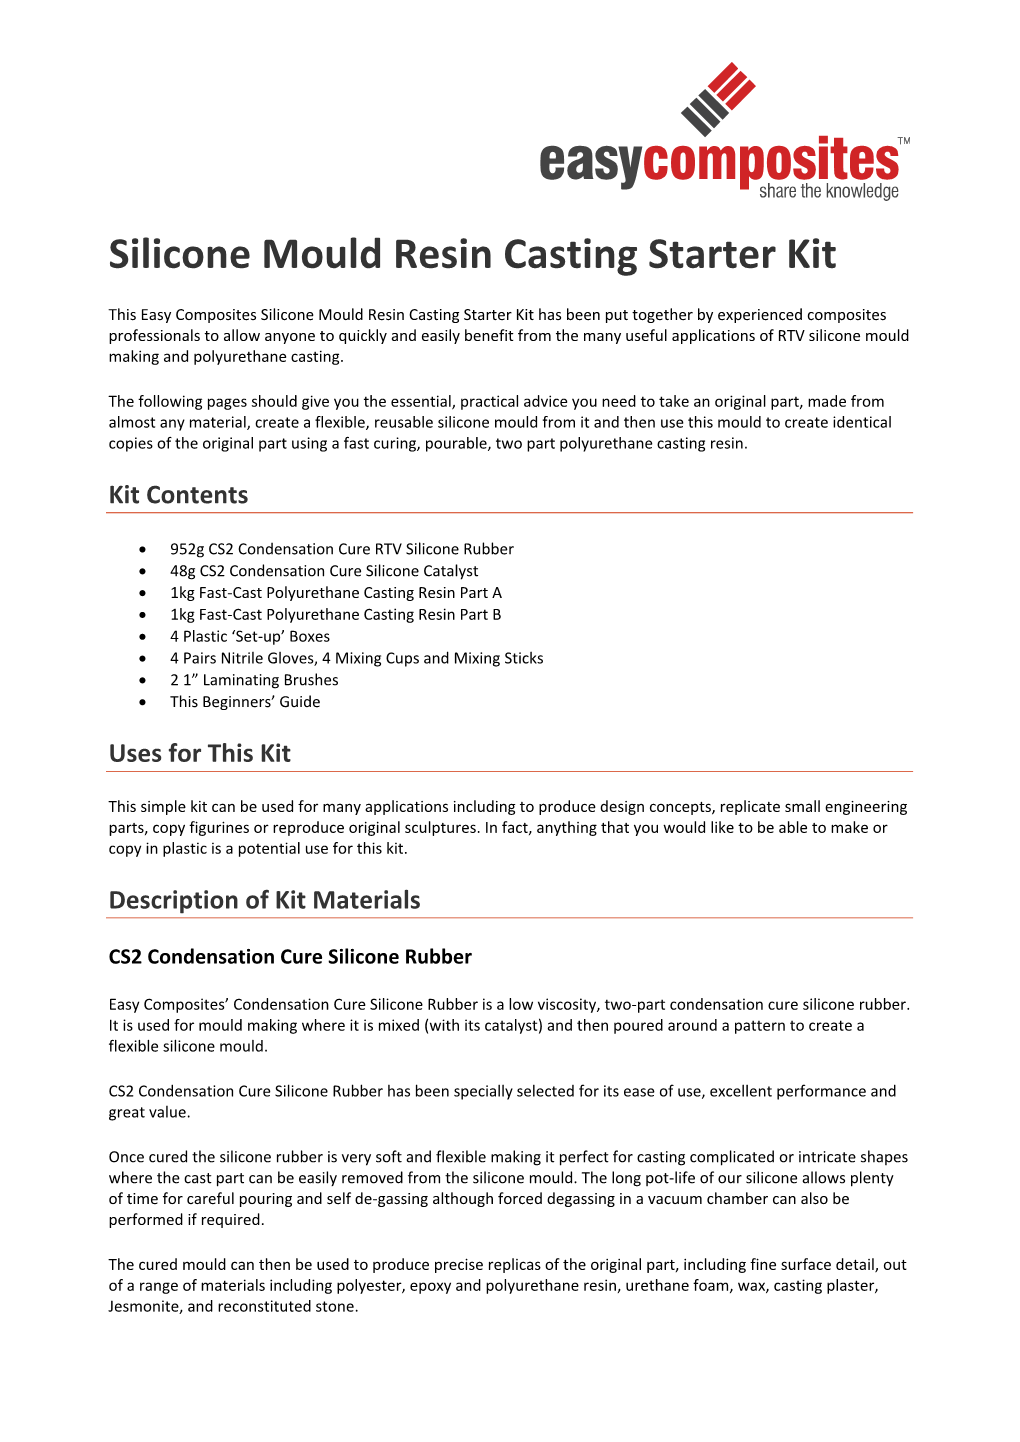 Silicone Mould Resin Casting Starter Kit